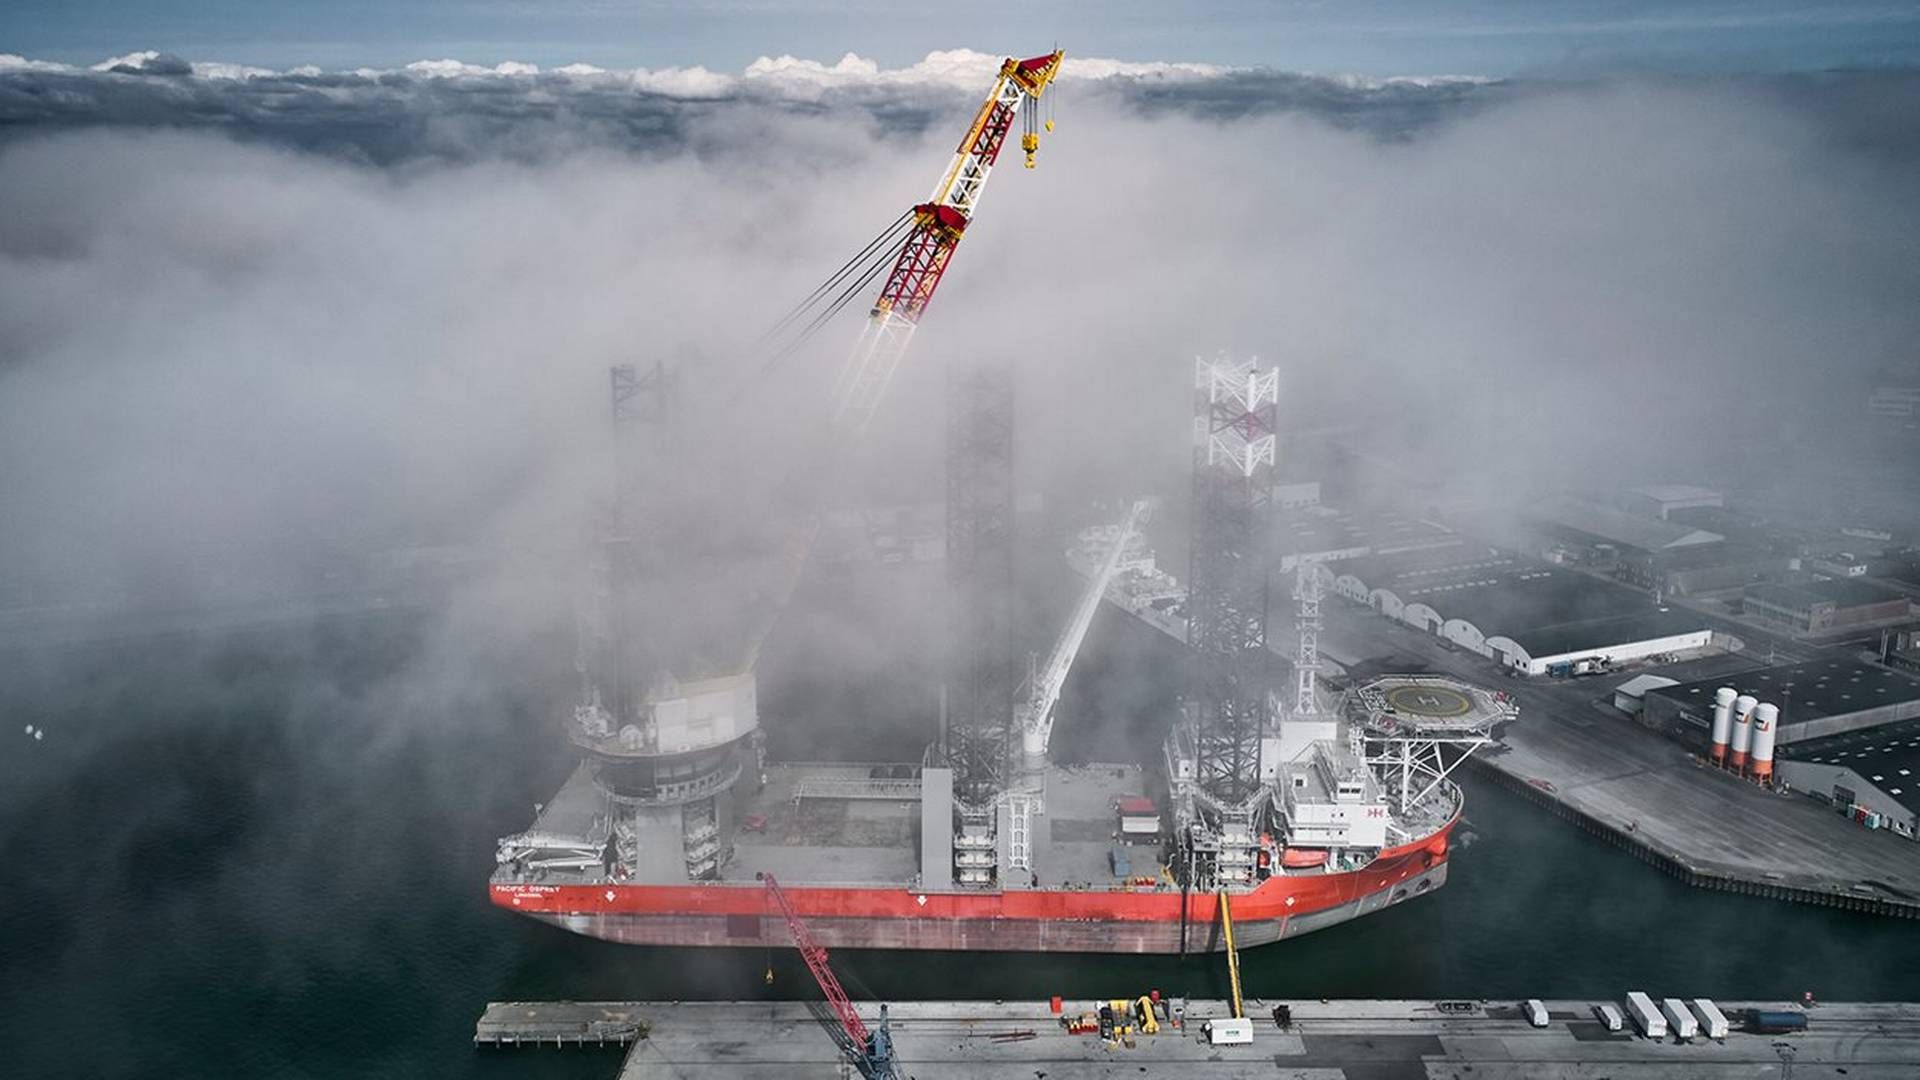 Cadeler currently has two large vessels that can install wind turbines offshore with the aid of large cranes on deck. The liner has more expensive ships on the way whereof one is ordered for a collaborative project with Ørsted. | Photo: Cadeler